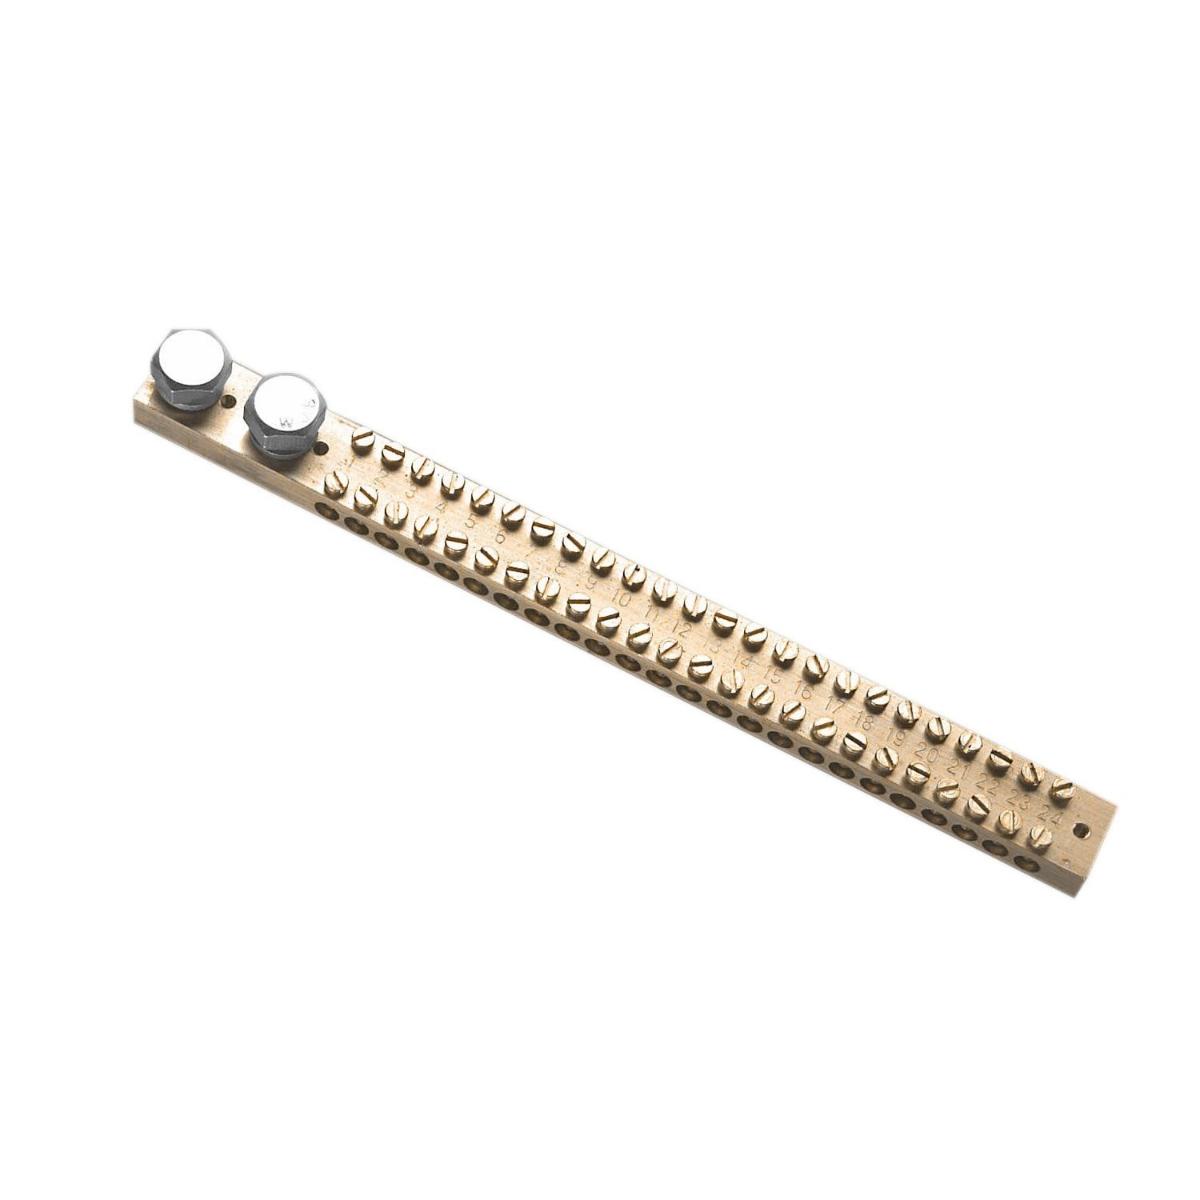 LINK BARS ONLY 24 TUNNELS 2 SCREW 2 STUD